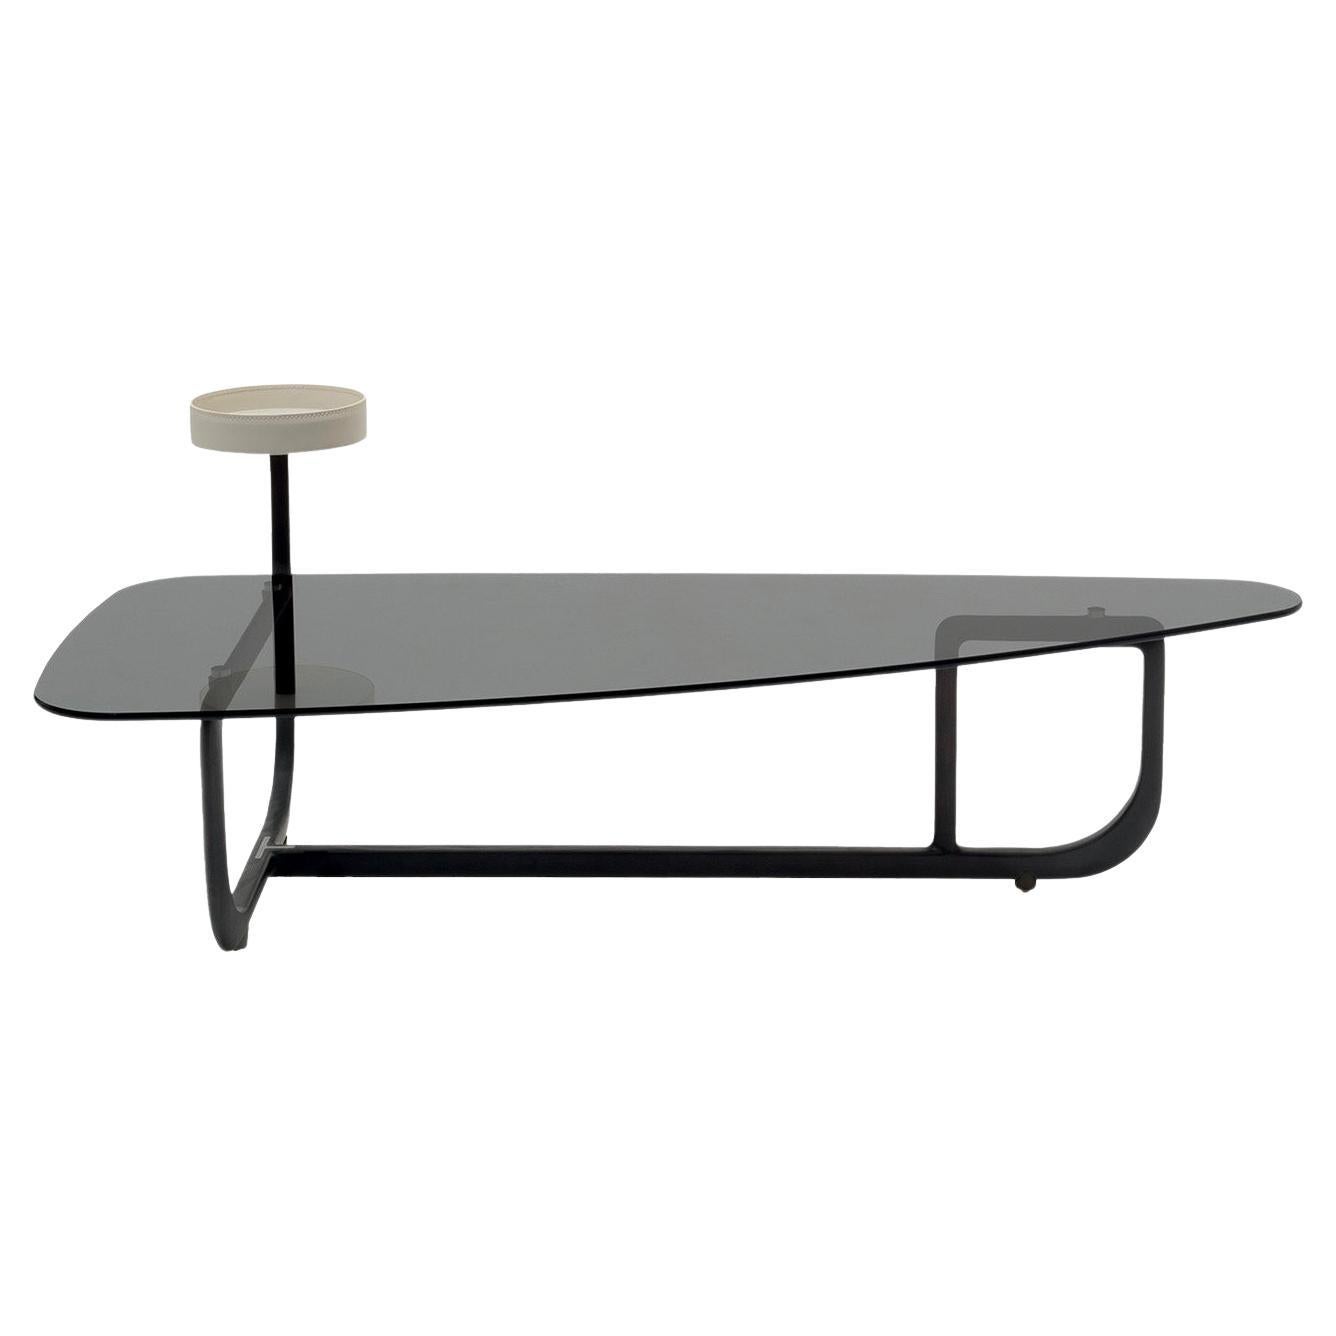 Amiral Coffee Table